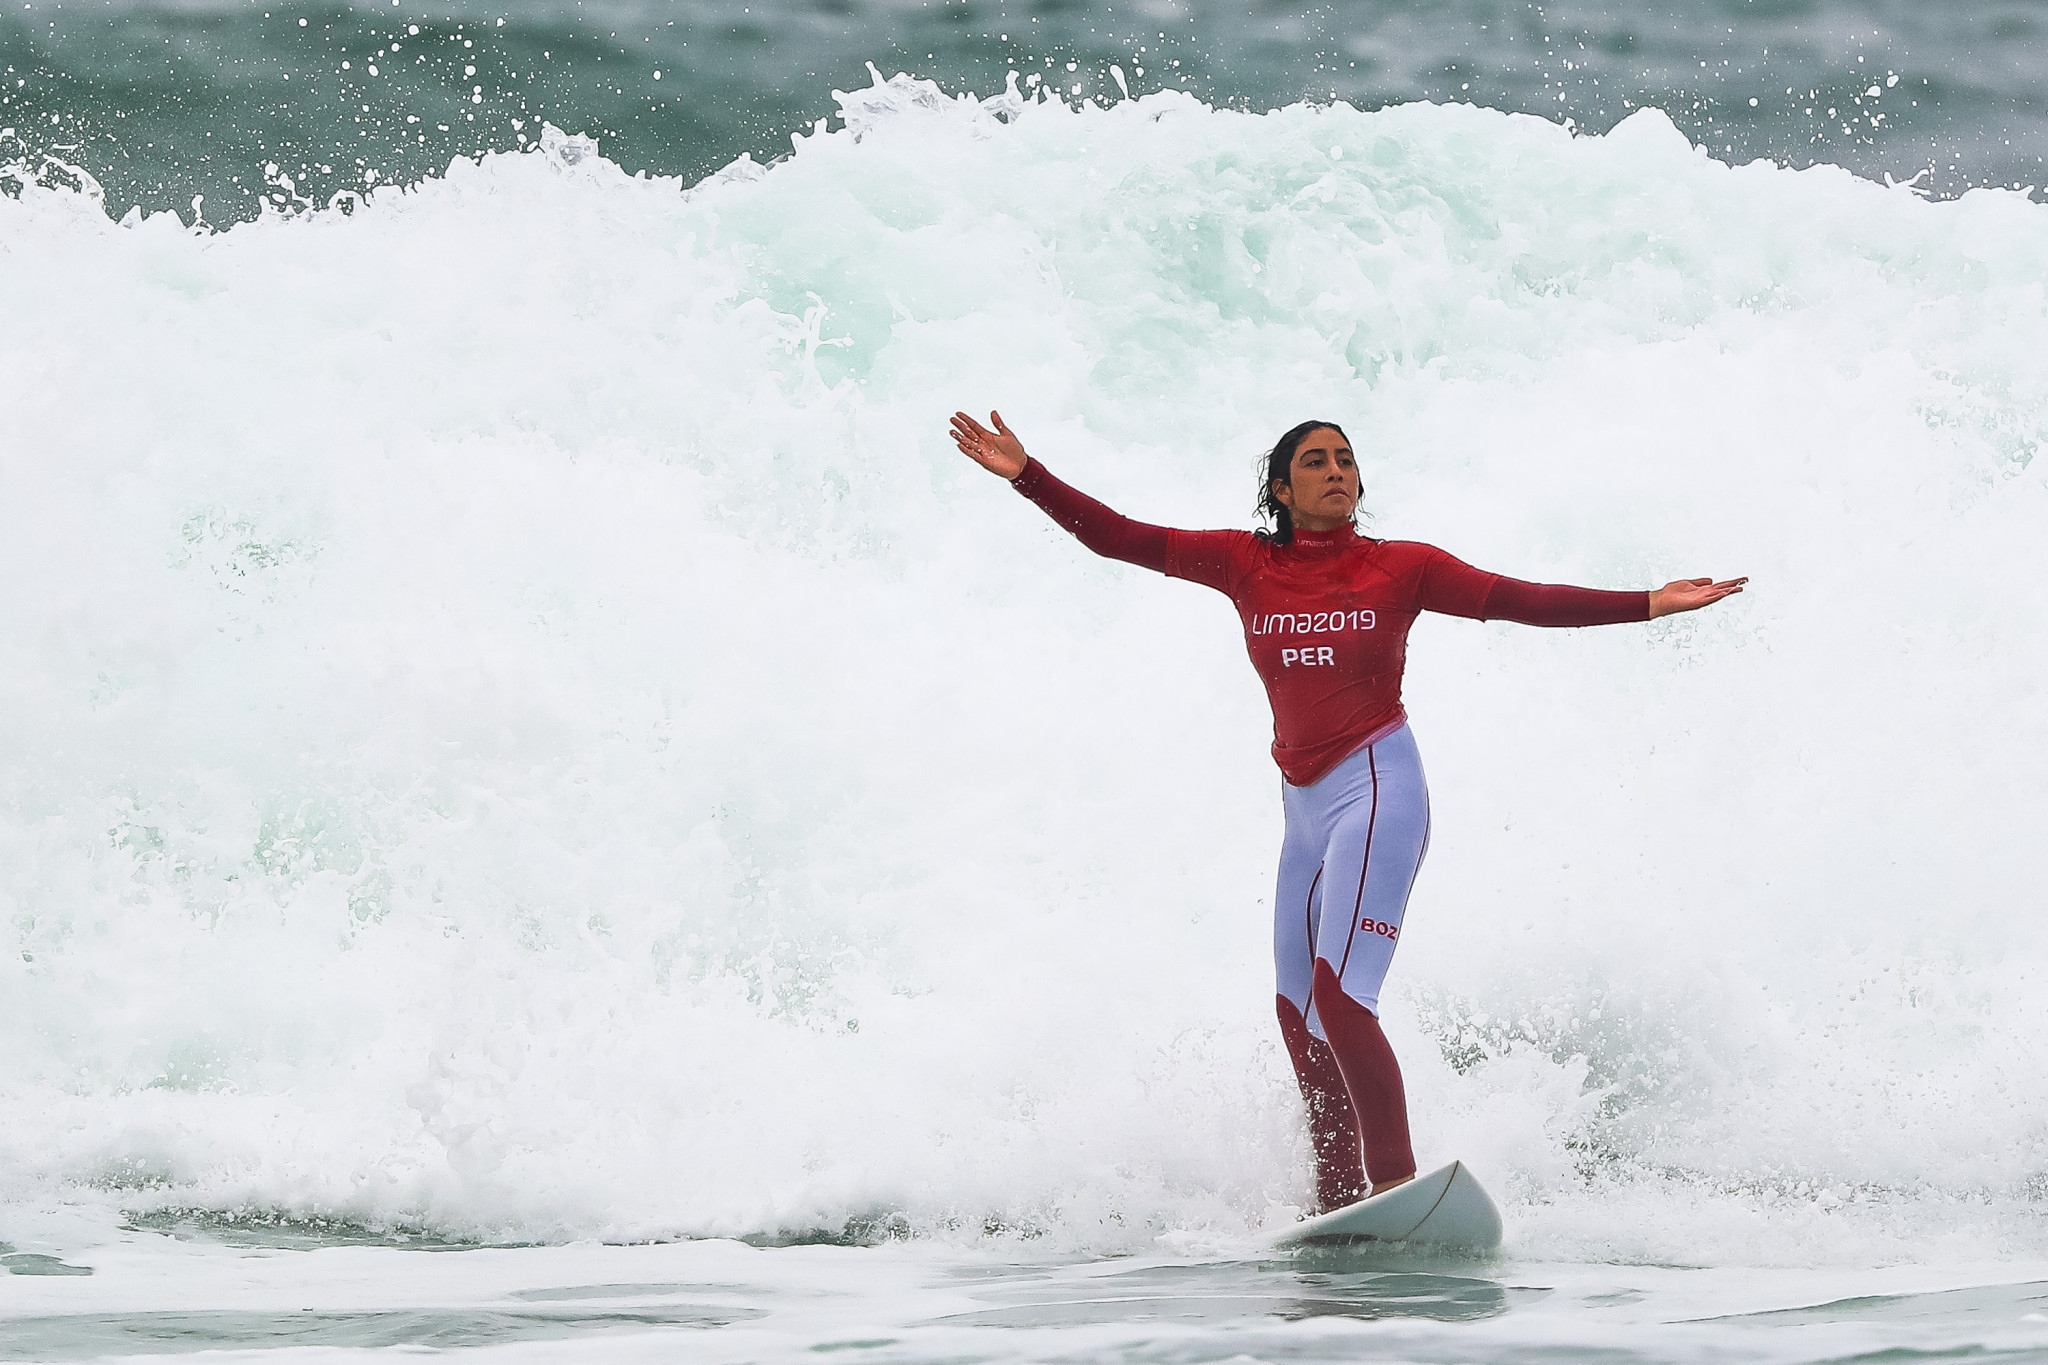 Pan American Games surfing champion pleased with progress so far in first competition since pandemic